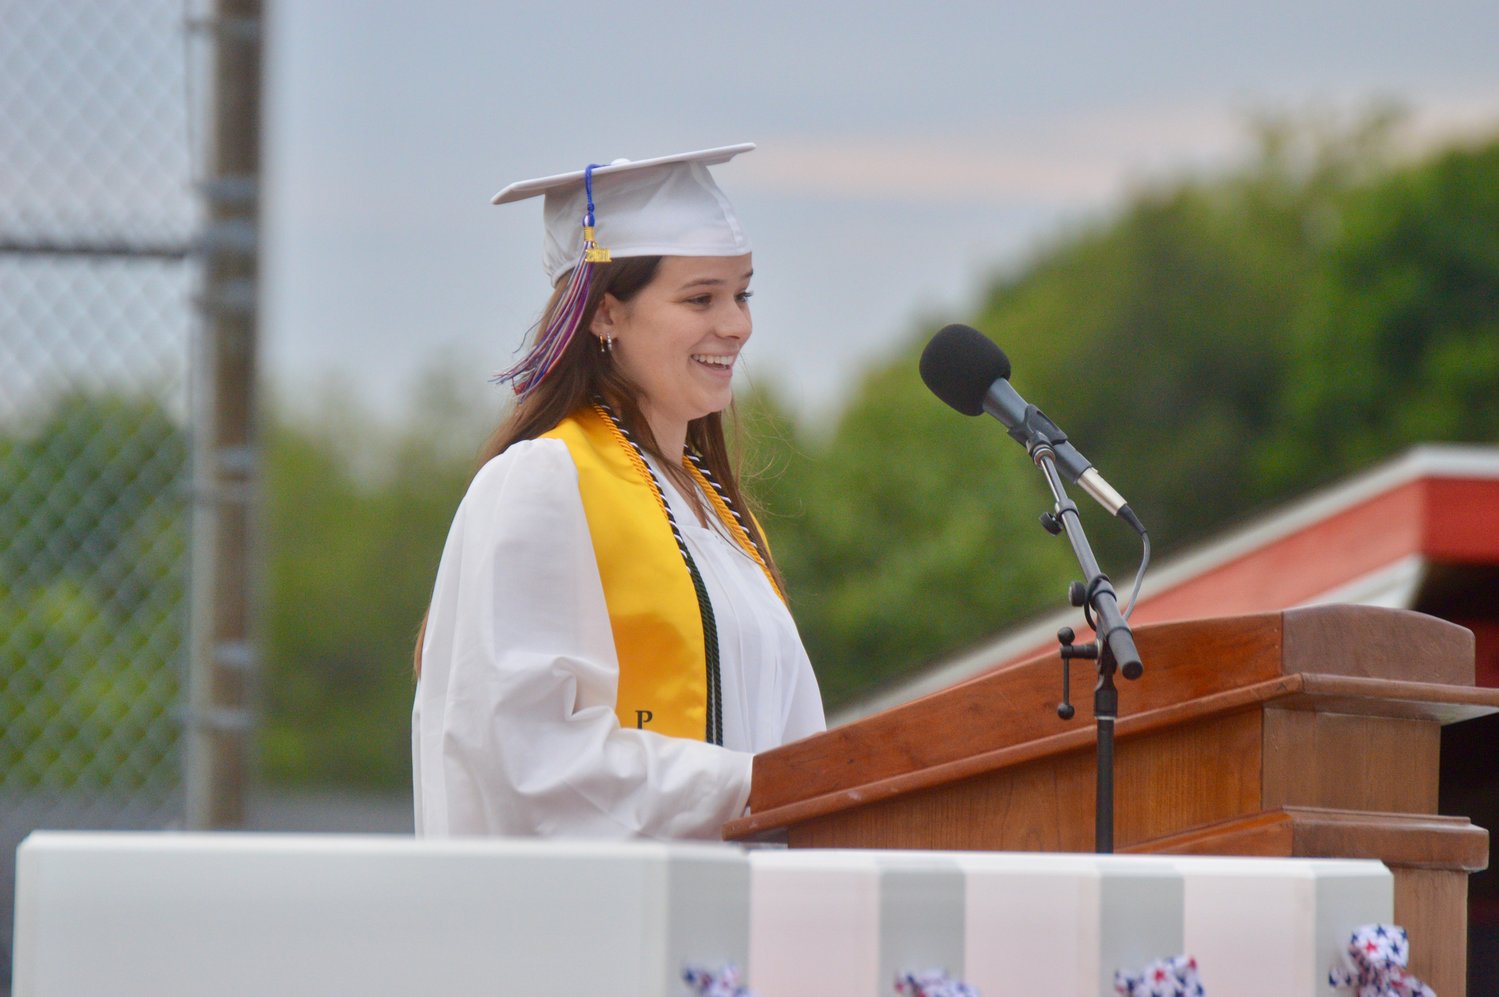 Maeve Sullivan, senior class president, asked everyone to take a moment to appreciate the “fleeting” time of collectiveness.